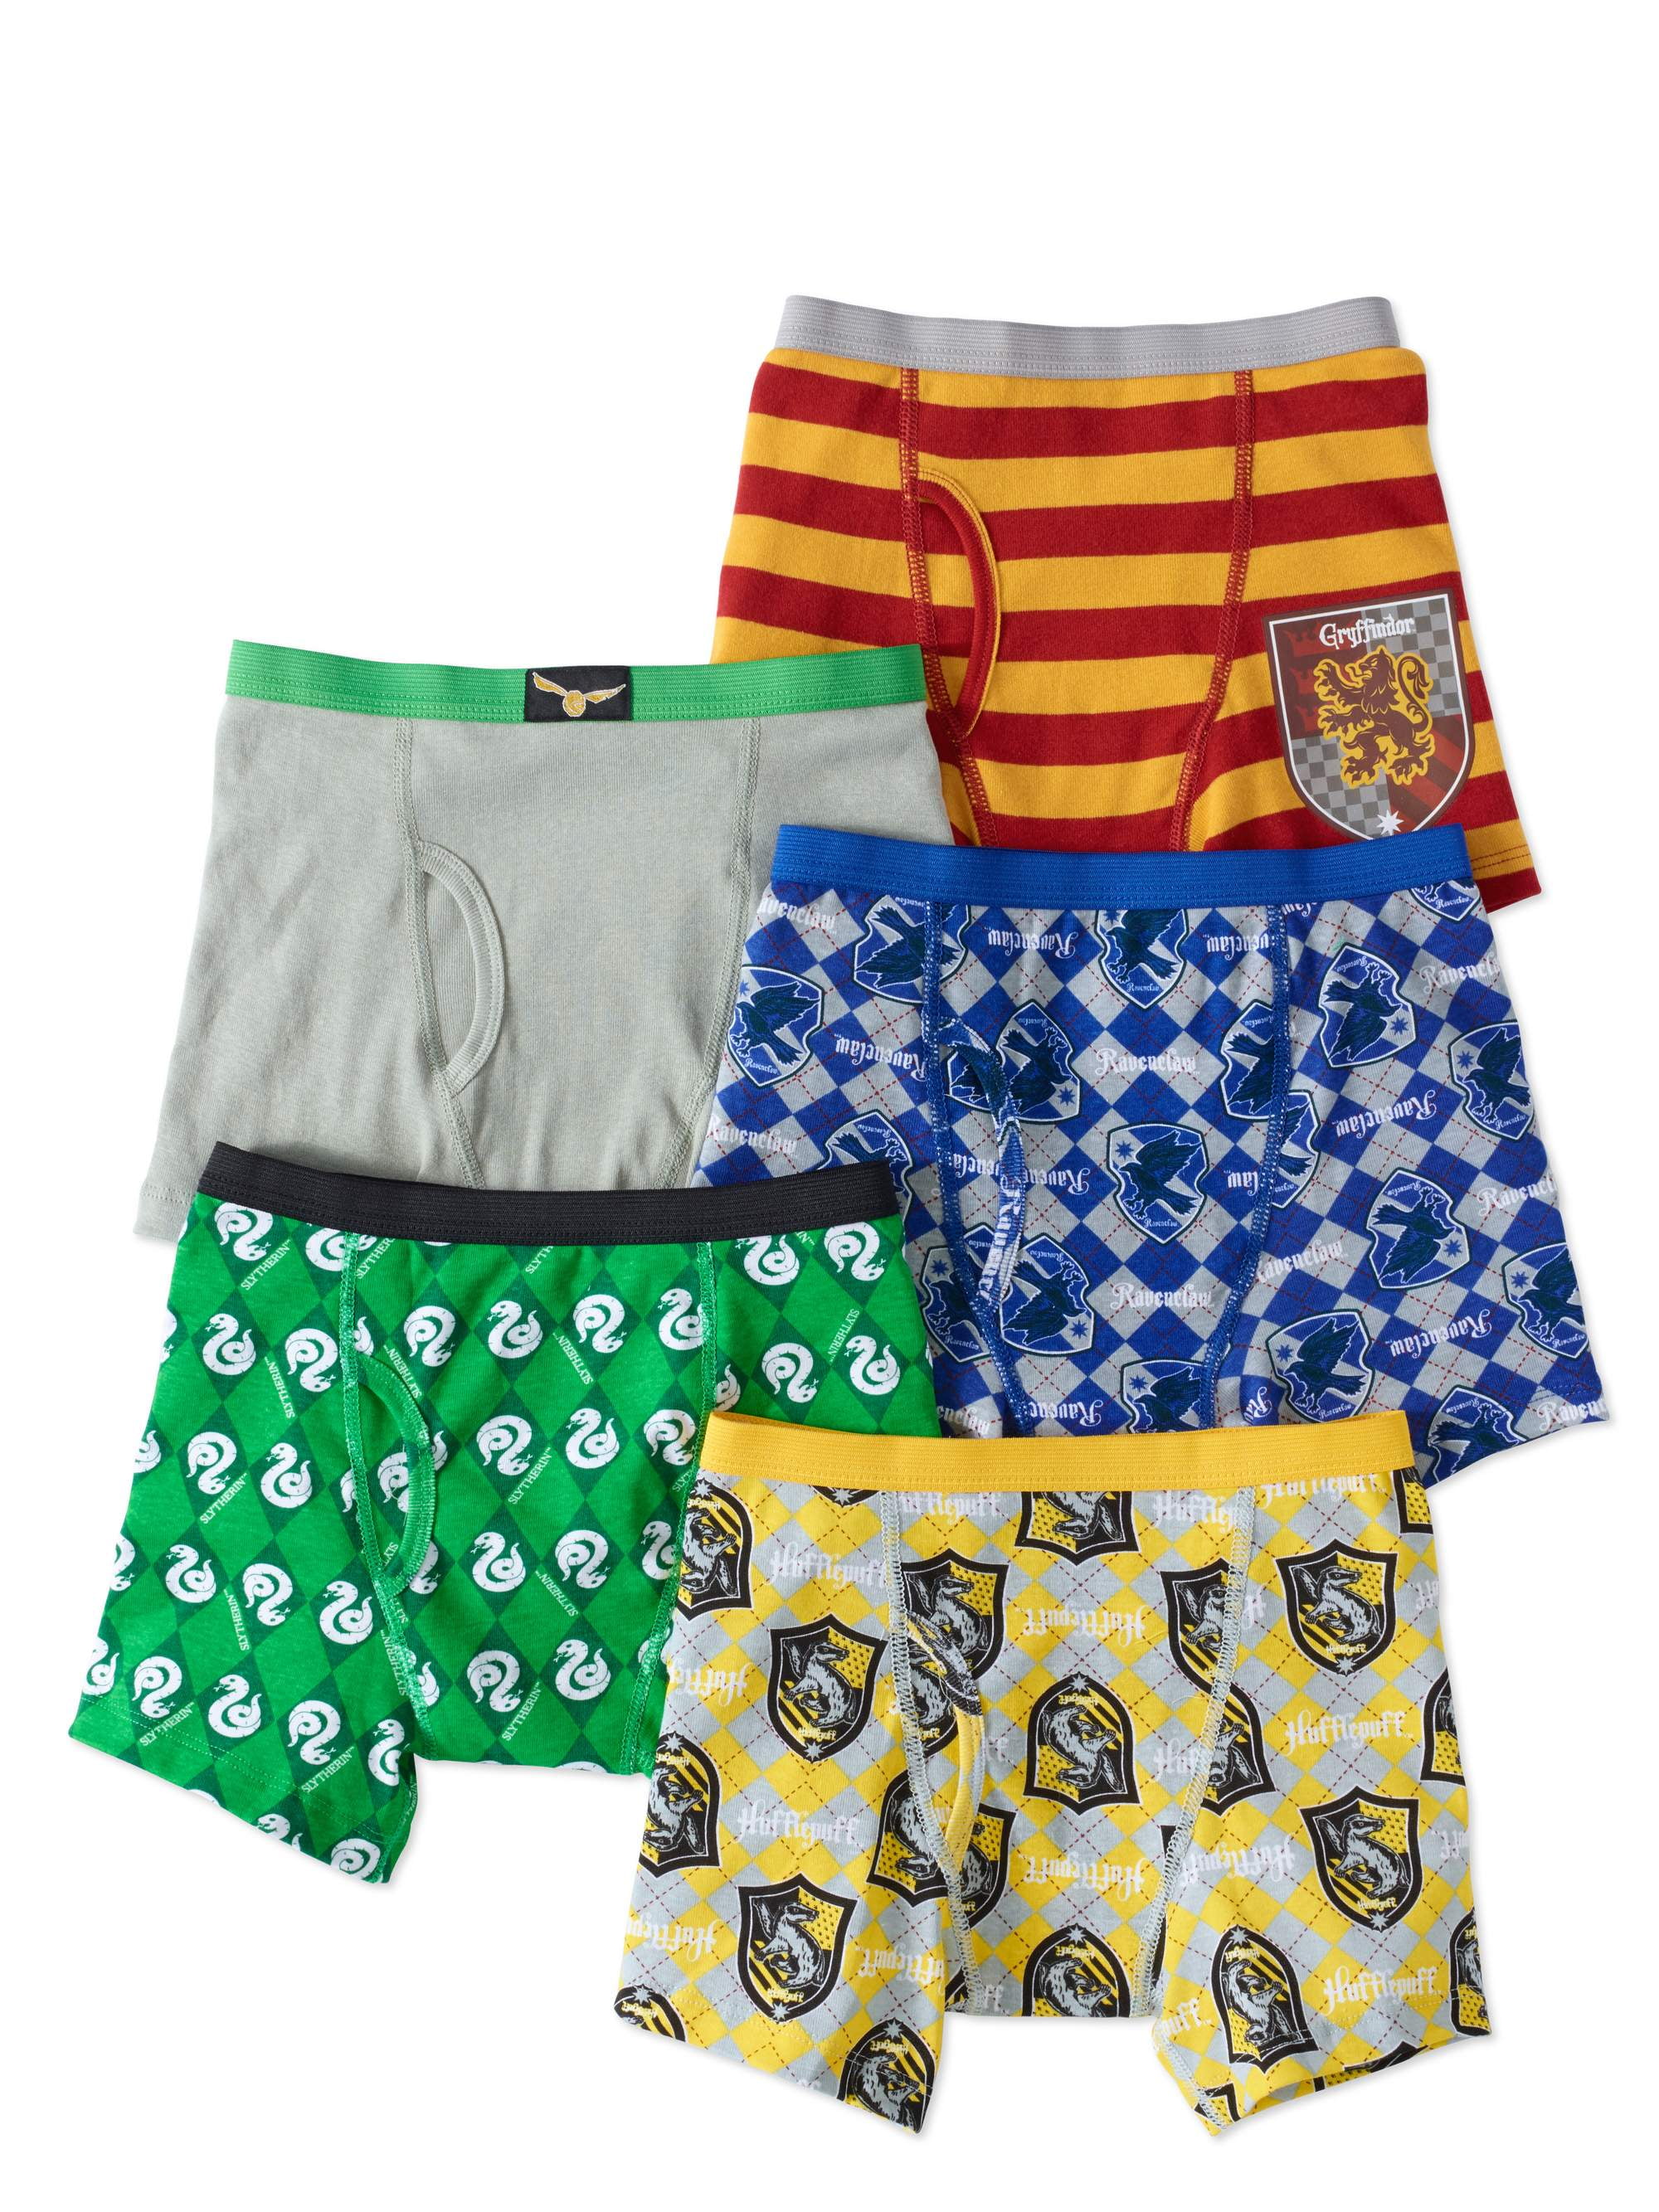 Harry Potter Hogwarts Houses Mens Briefly Stated Boxer Shorts Underwear